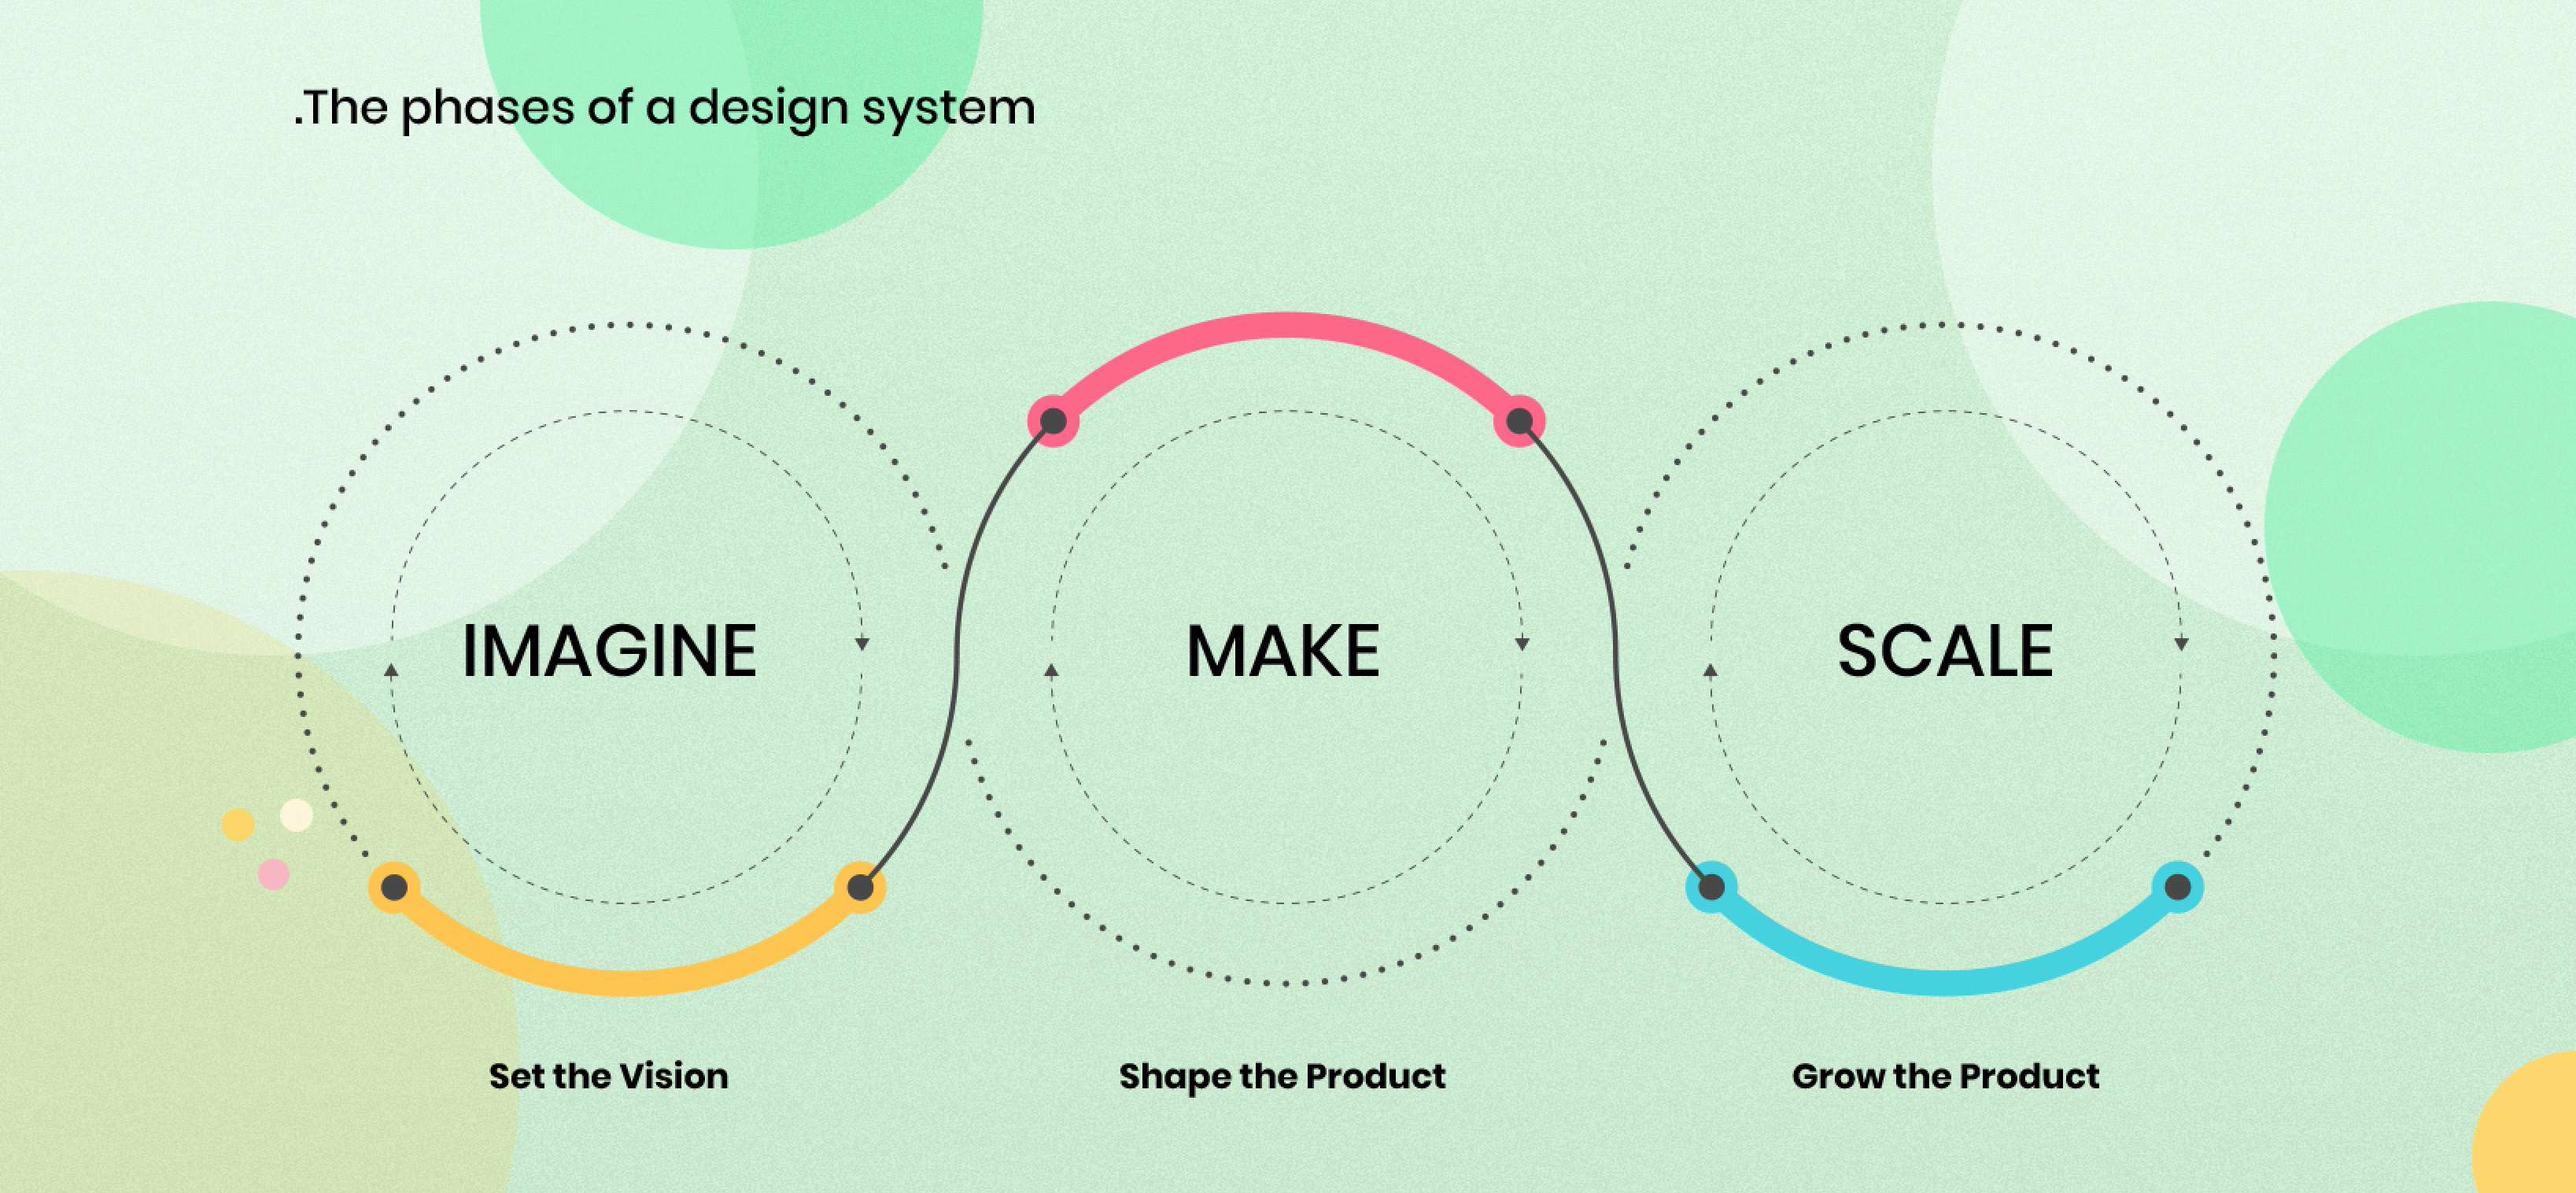 The phases of a design system